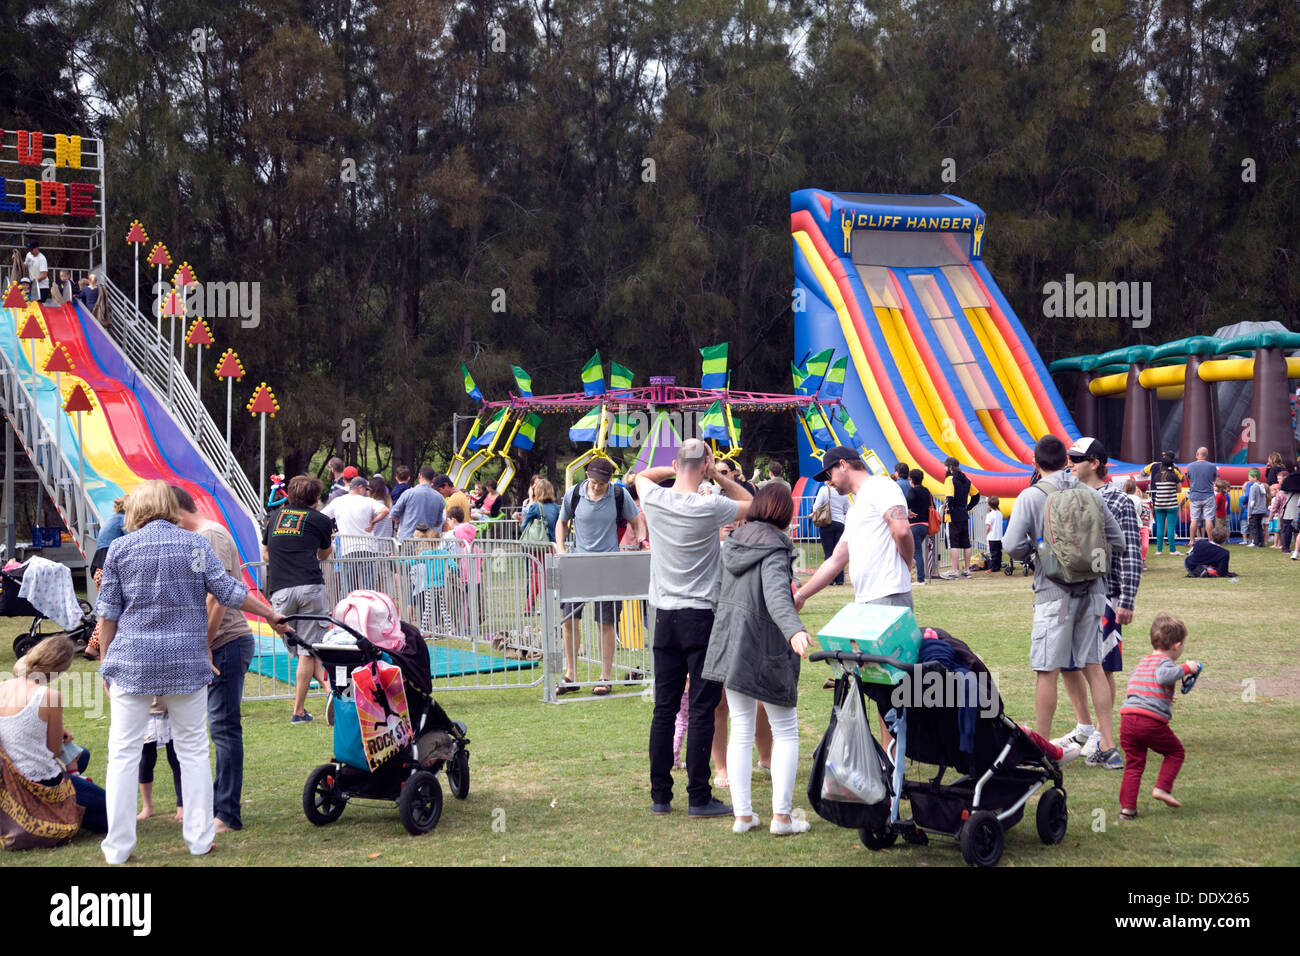 Sydney school has its annual open carnival day for parents and students with entertainment and events for the community,NSW,Australia Stock Photo